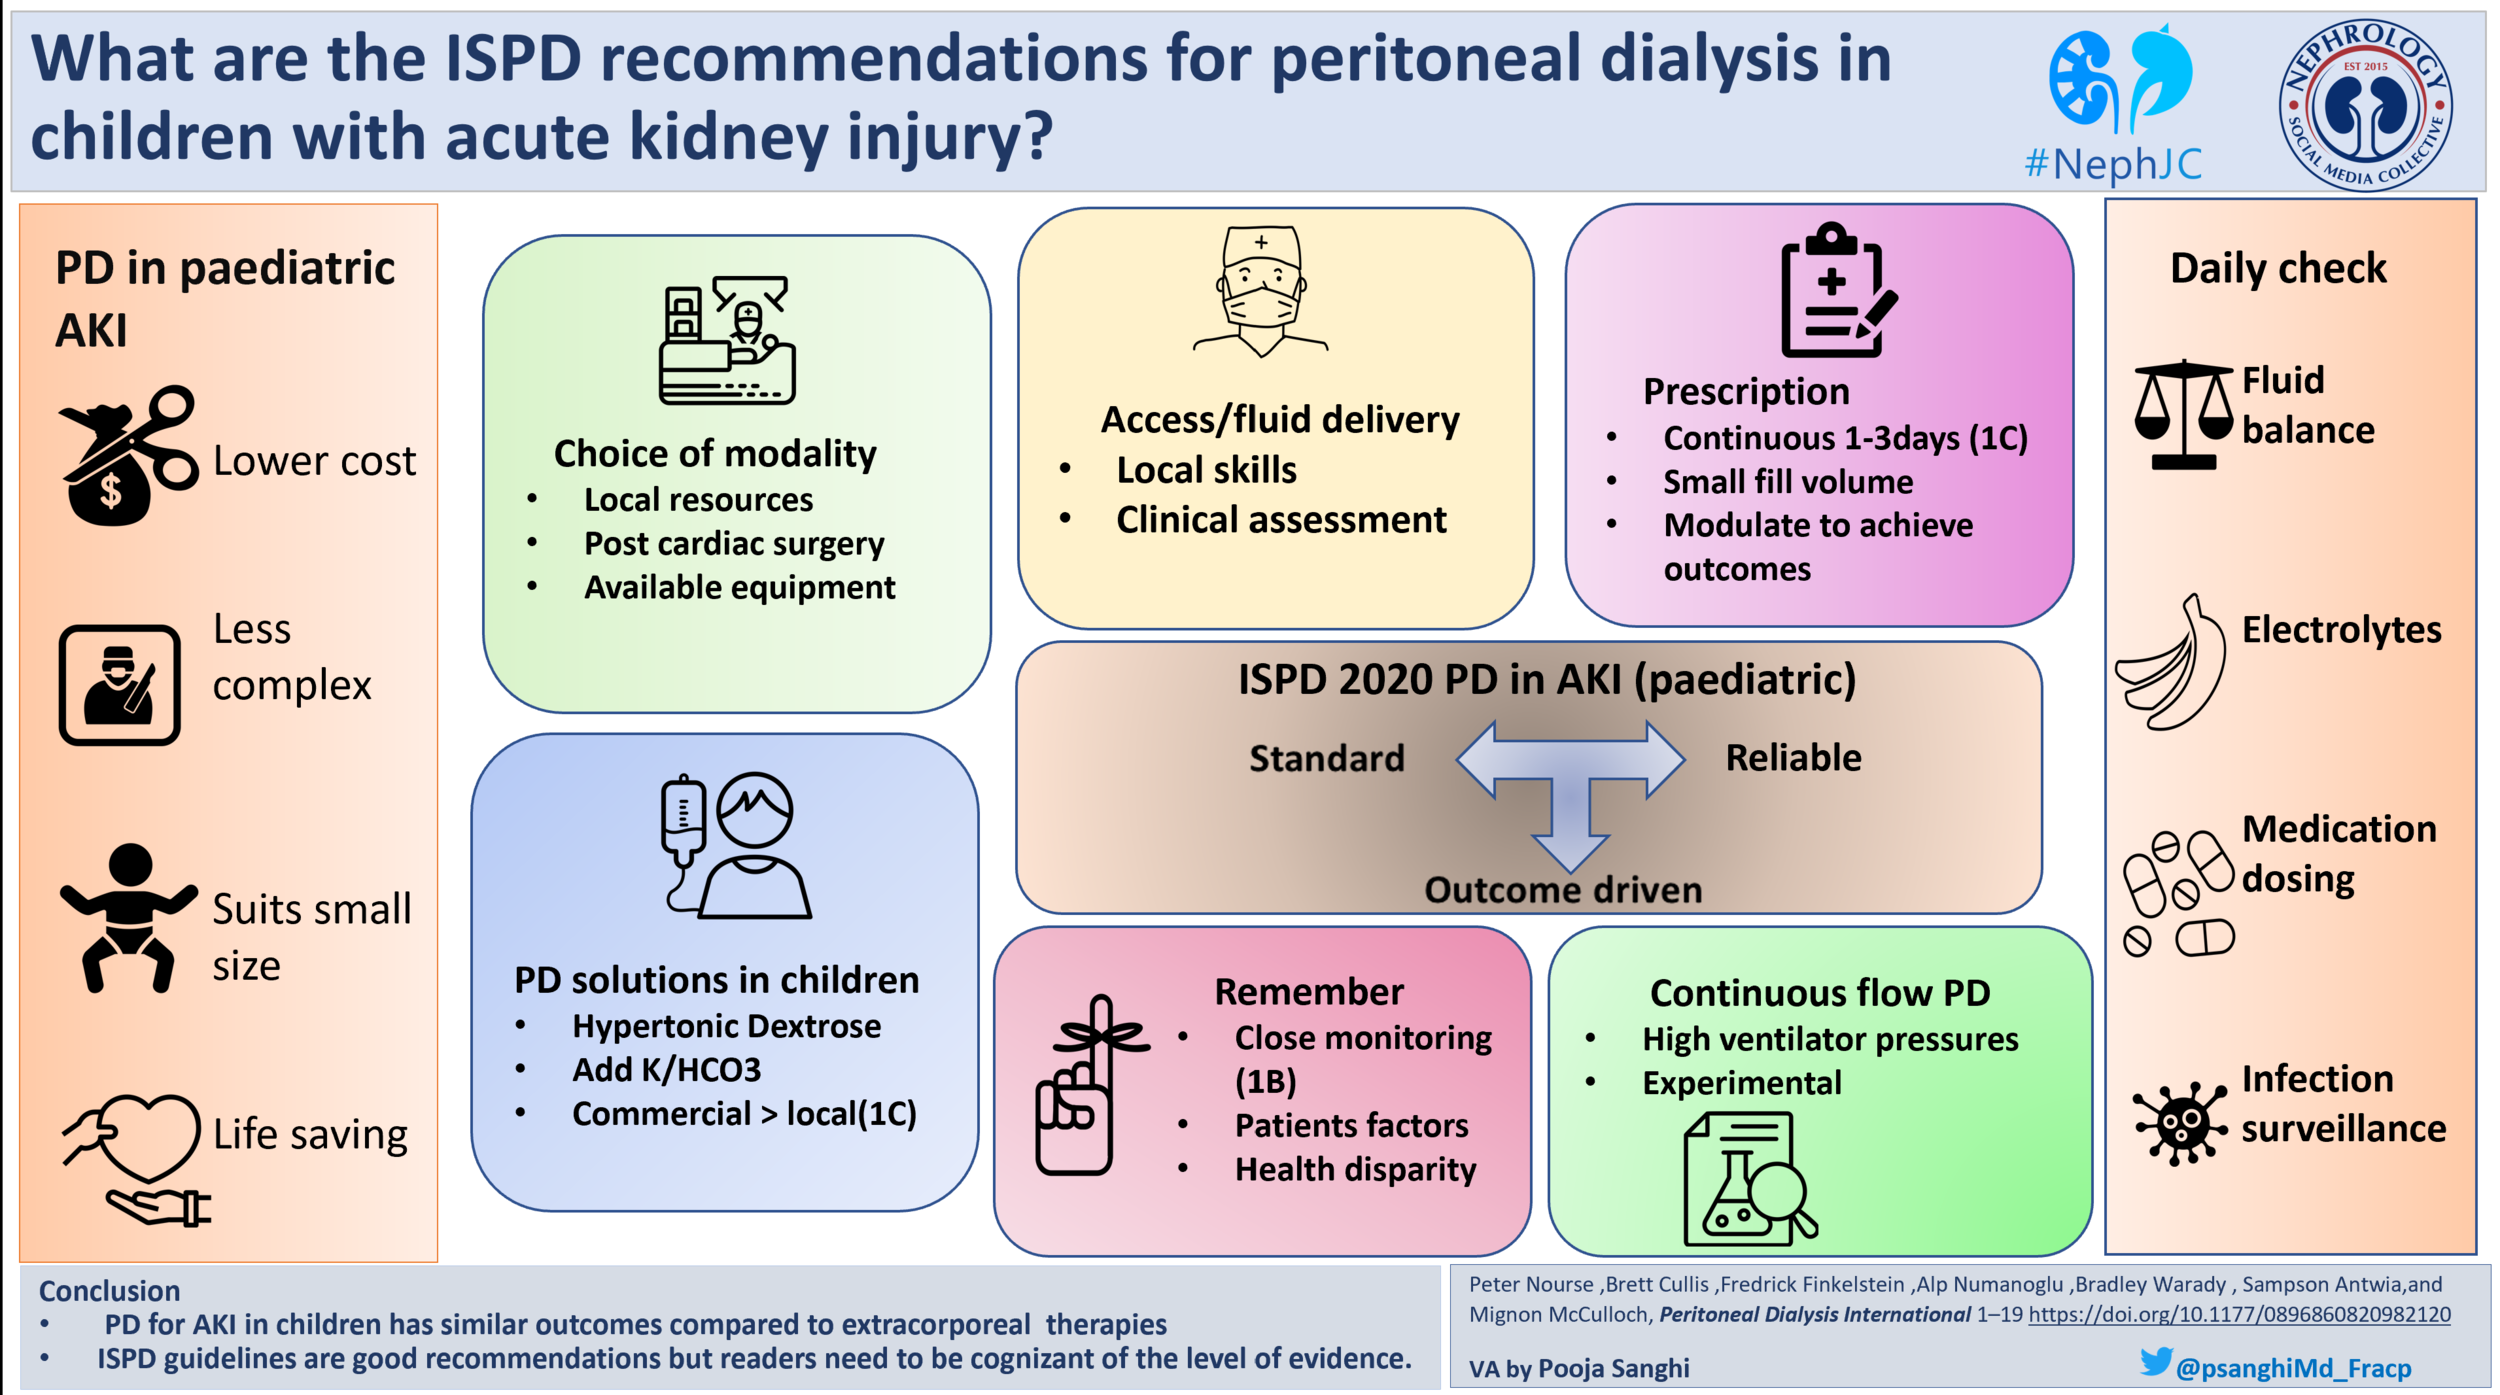 ISPD Guidelines for PD in Pediatric AKI: the Visual Abstract — NephJC